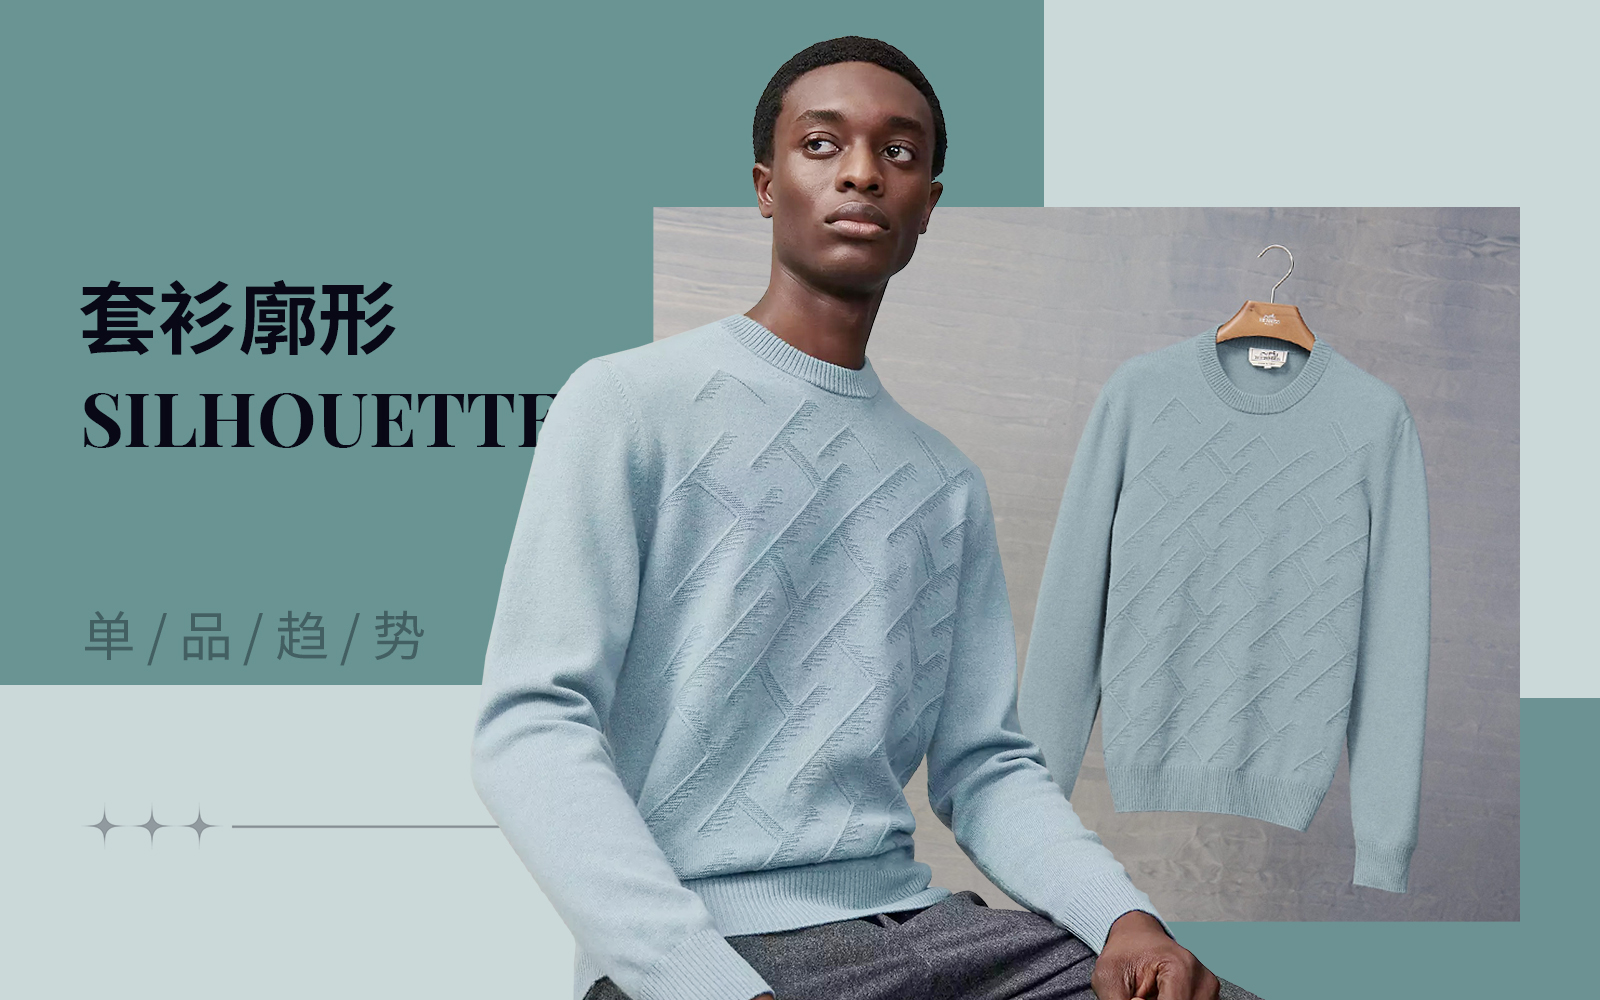 Business Pullover -- The Item Trend for Men's Knitwear